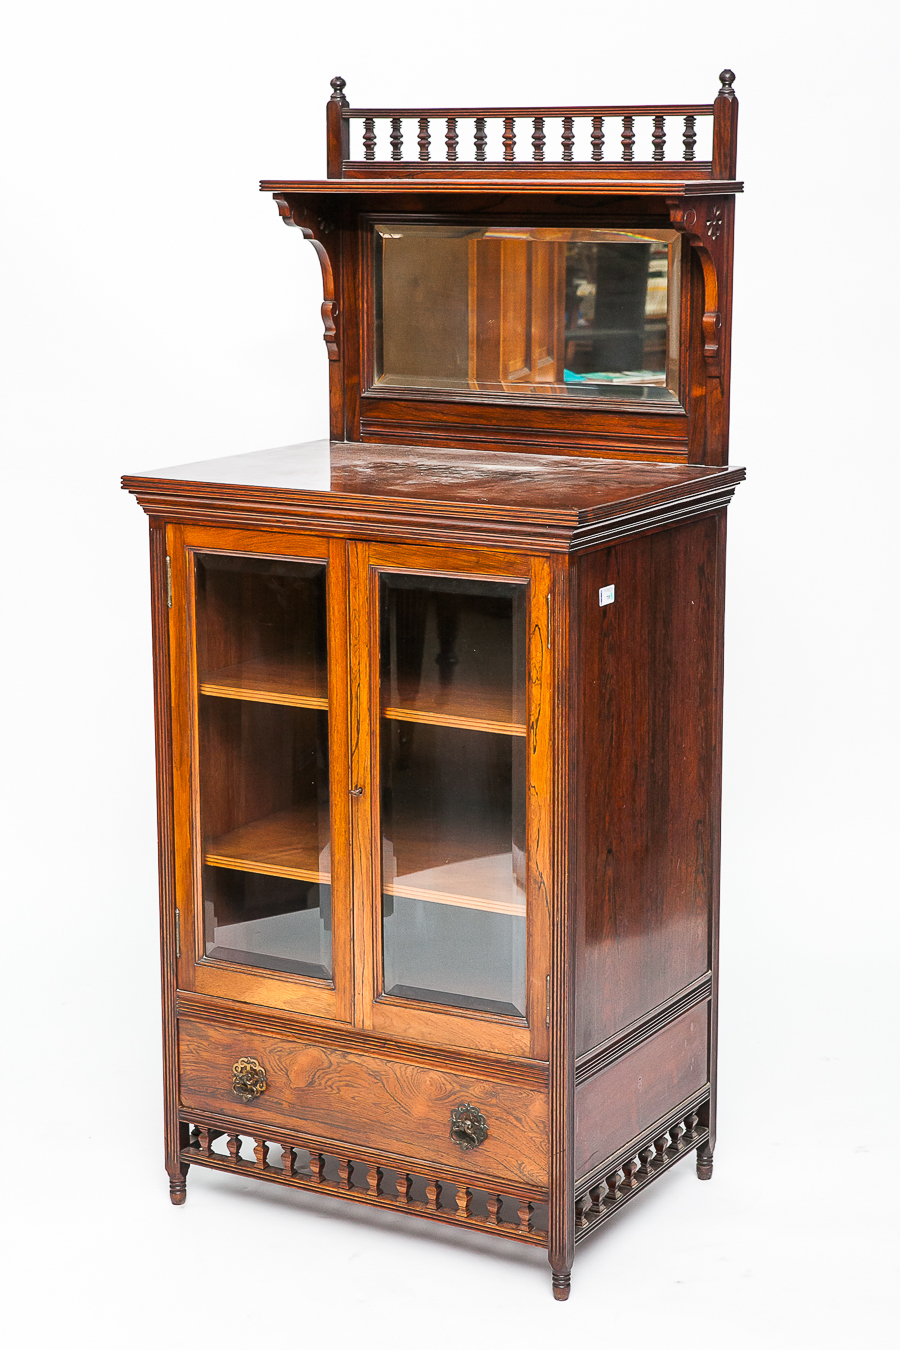 19TH CENTURY ROSEWOOD MIRROR BACKED CABINET
the overstructure with rail,